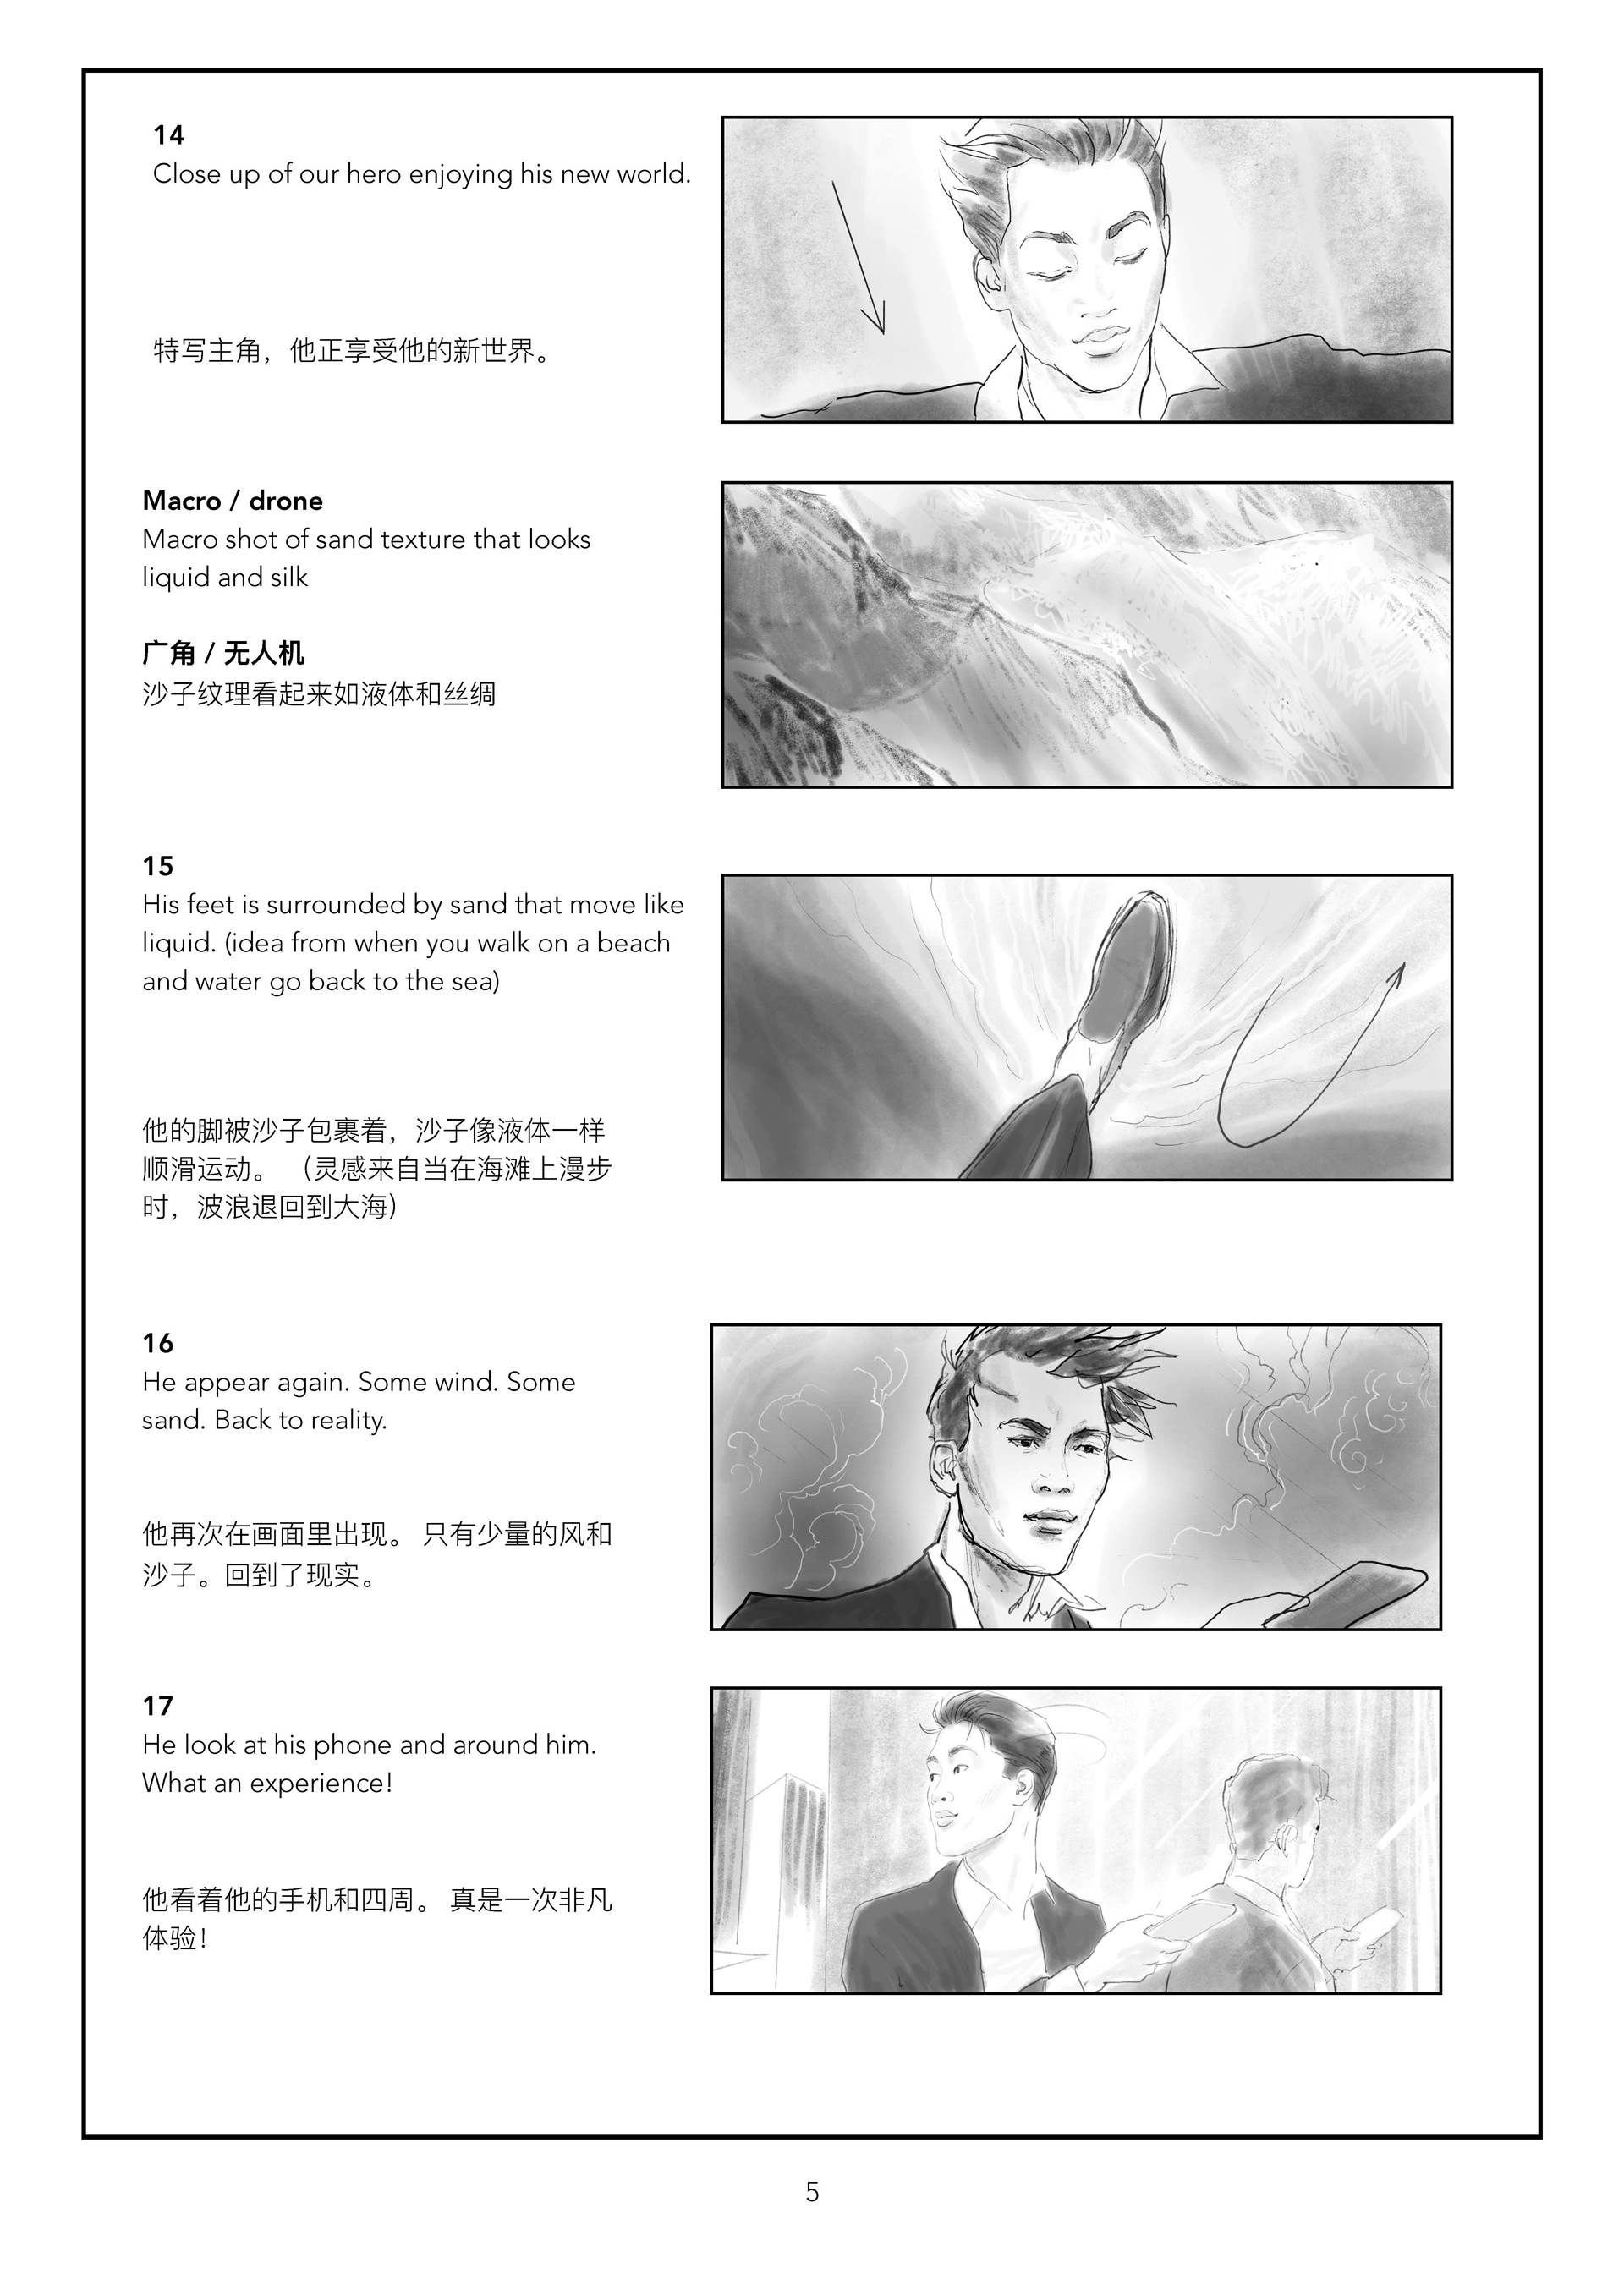 Oppo Compass storyboard 04